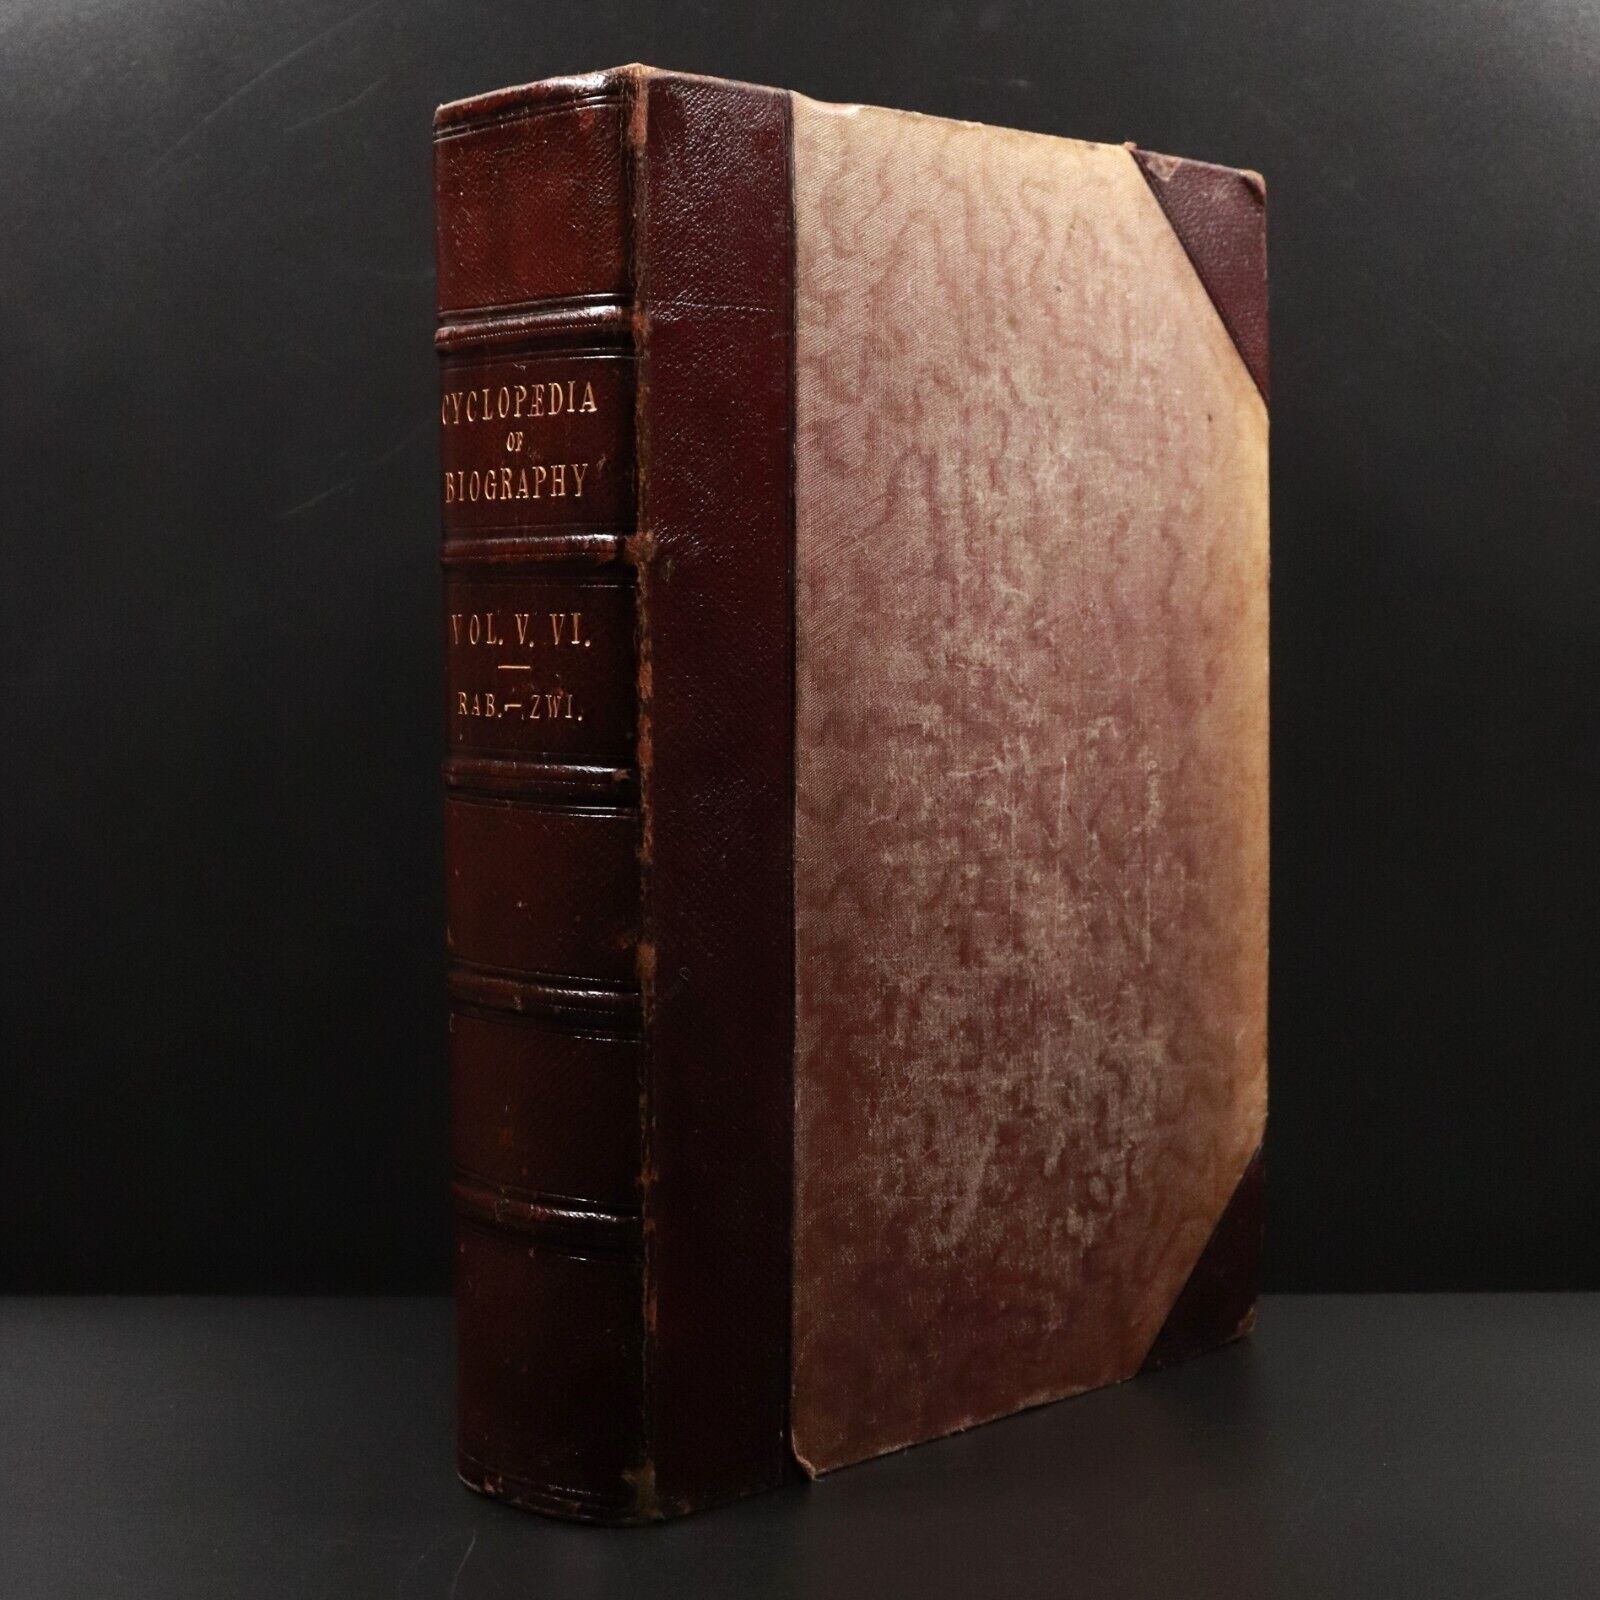 1858 Cyclopaedia Of Biography by Charles Knight Antique History Book Vols V & VI